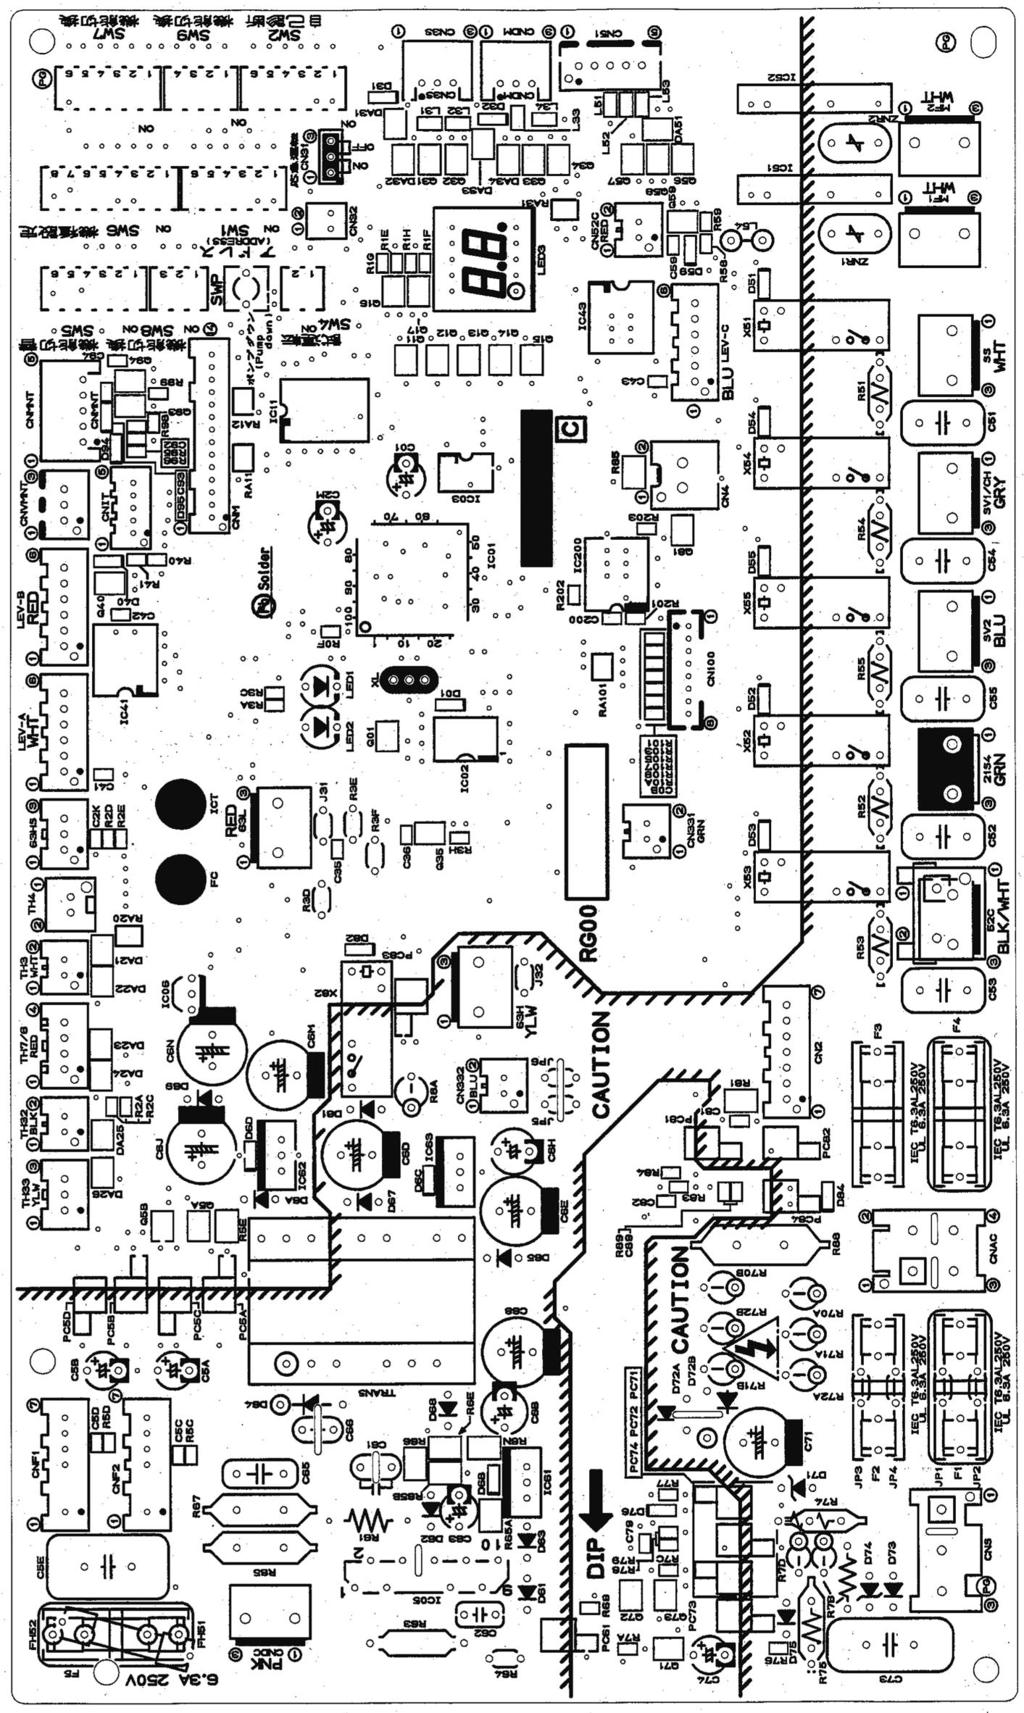 0-9. TEST POINT DIAGRAM Outdoor controller circuit board PUZ-A8/4/30/36/4NHA PUZ-A8/4/30/36/4NHA-BS PUY-A/8/4/30/36/4NHA PUY-A/8/4/30/36/4NHA-BS <CAUTI> TEST POINT is high voltage.